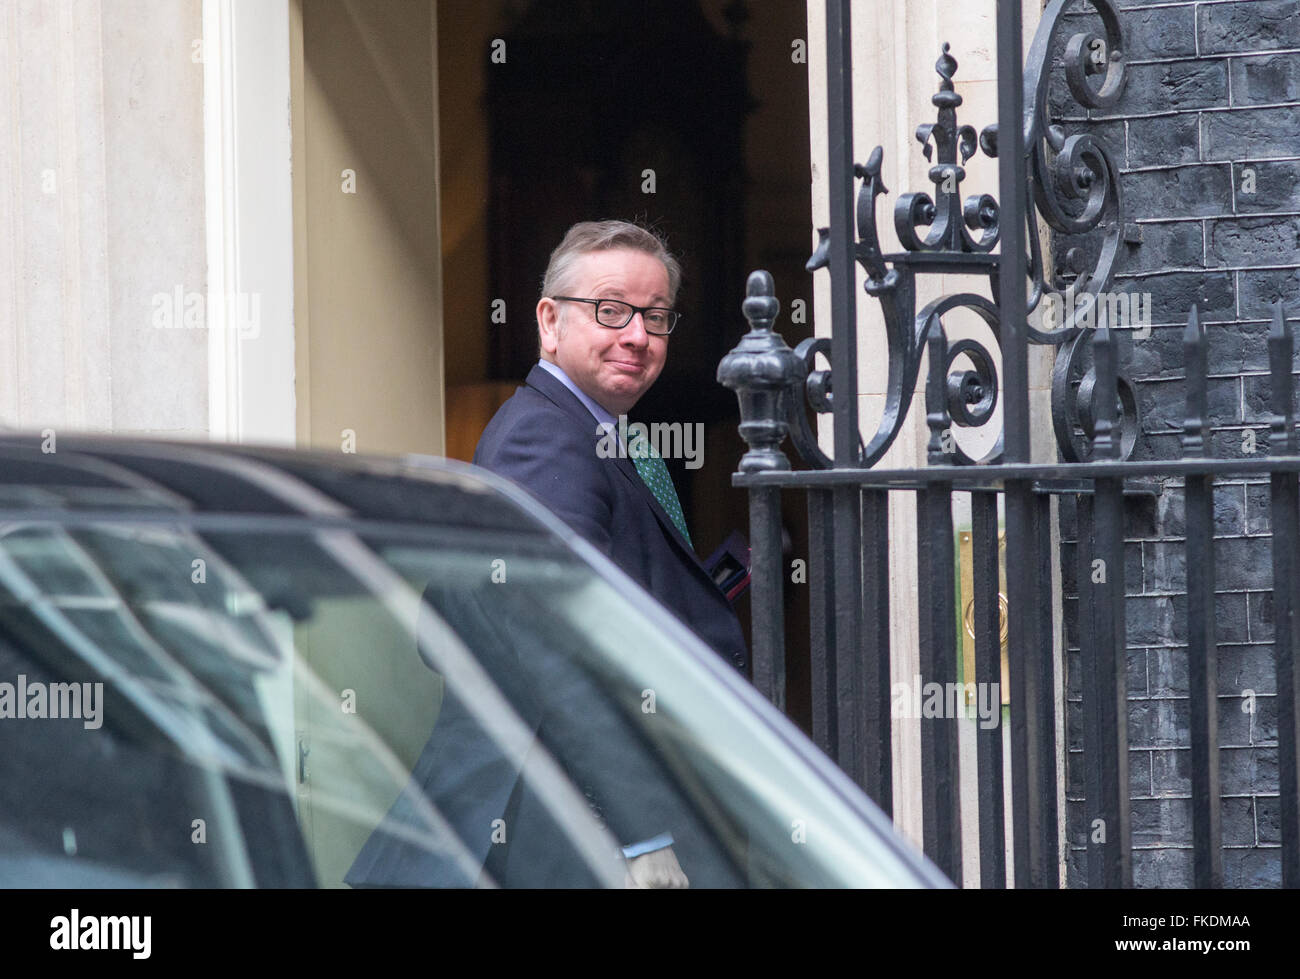 Michael Gove,secretary of state for Justice,arrives at Number 10 Downing Street.He is campaigning to leave the EU Stock Photo